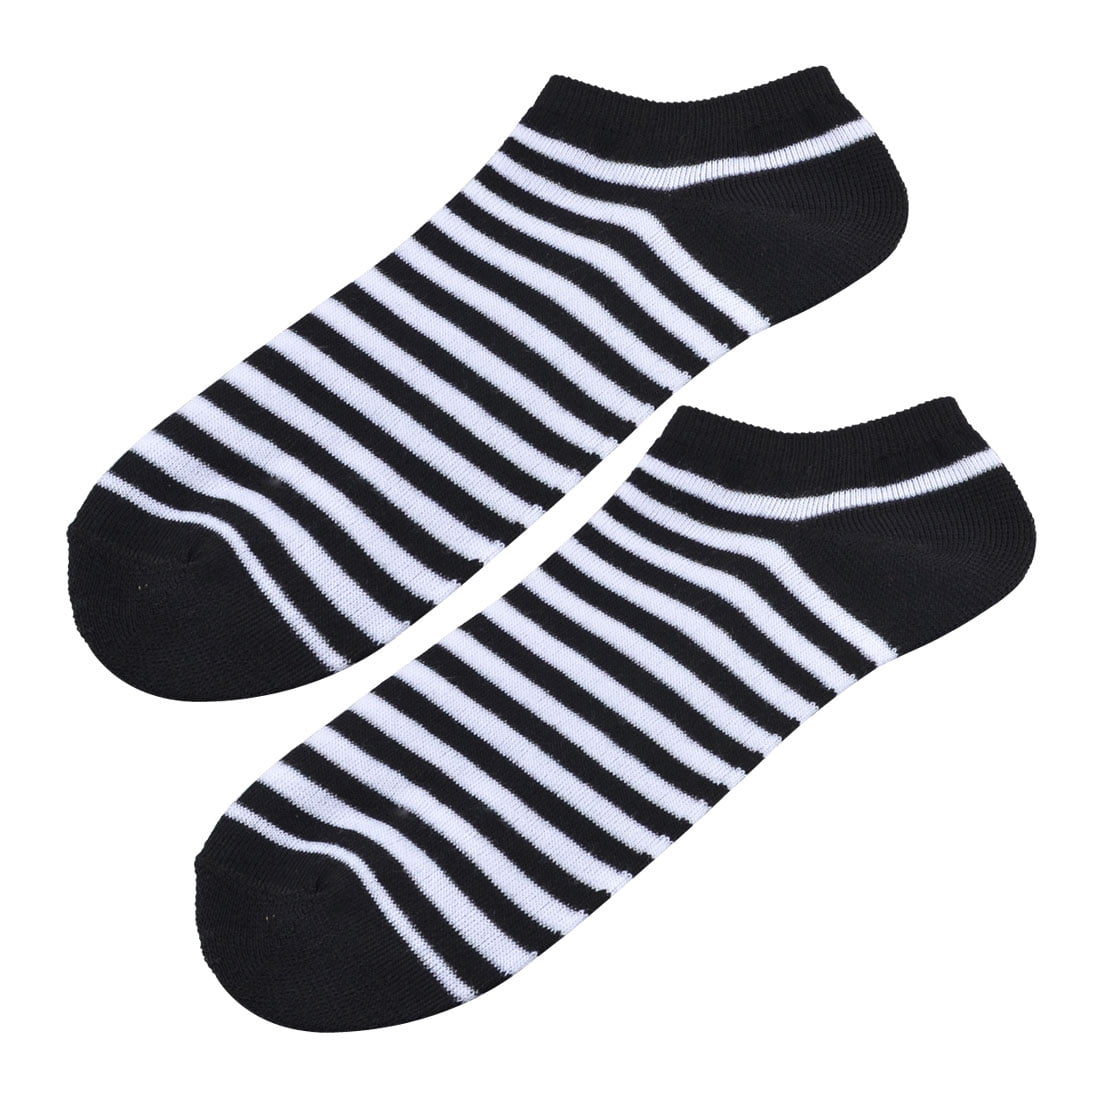 Pair Striped Elastic Ankle High Low Cut Sports Socks Black White for ...